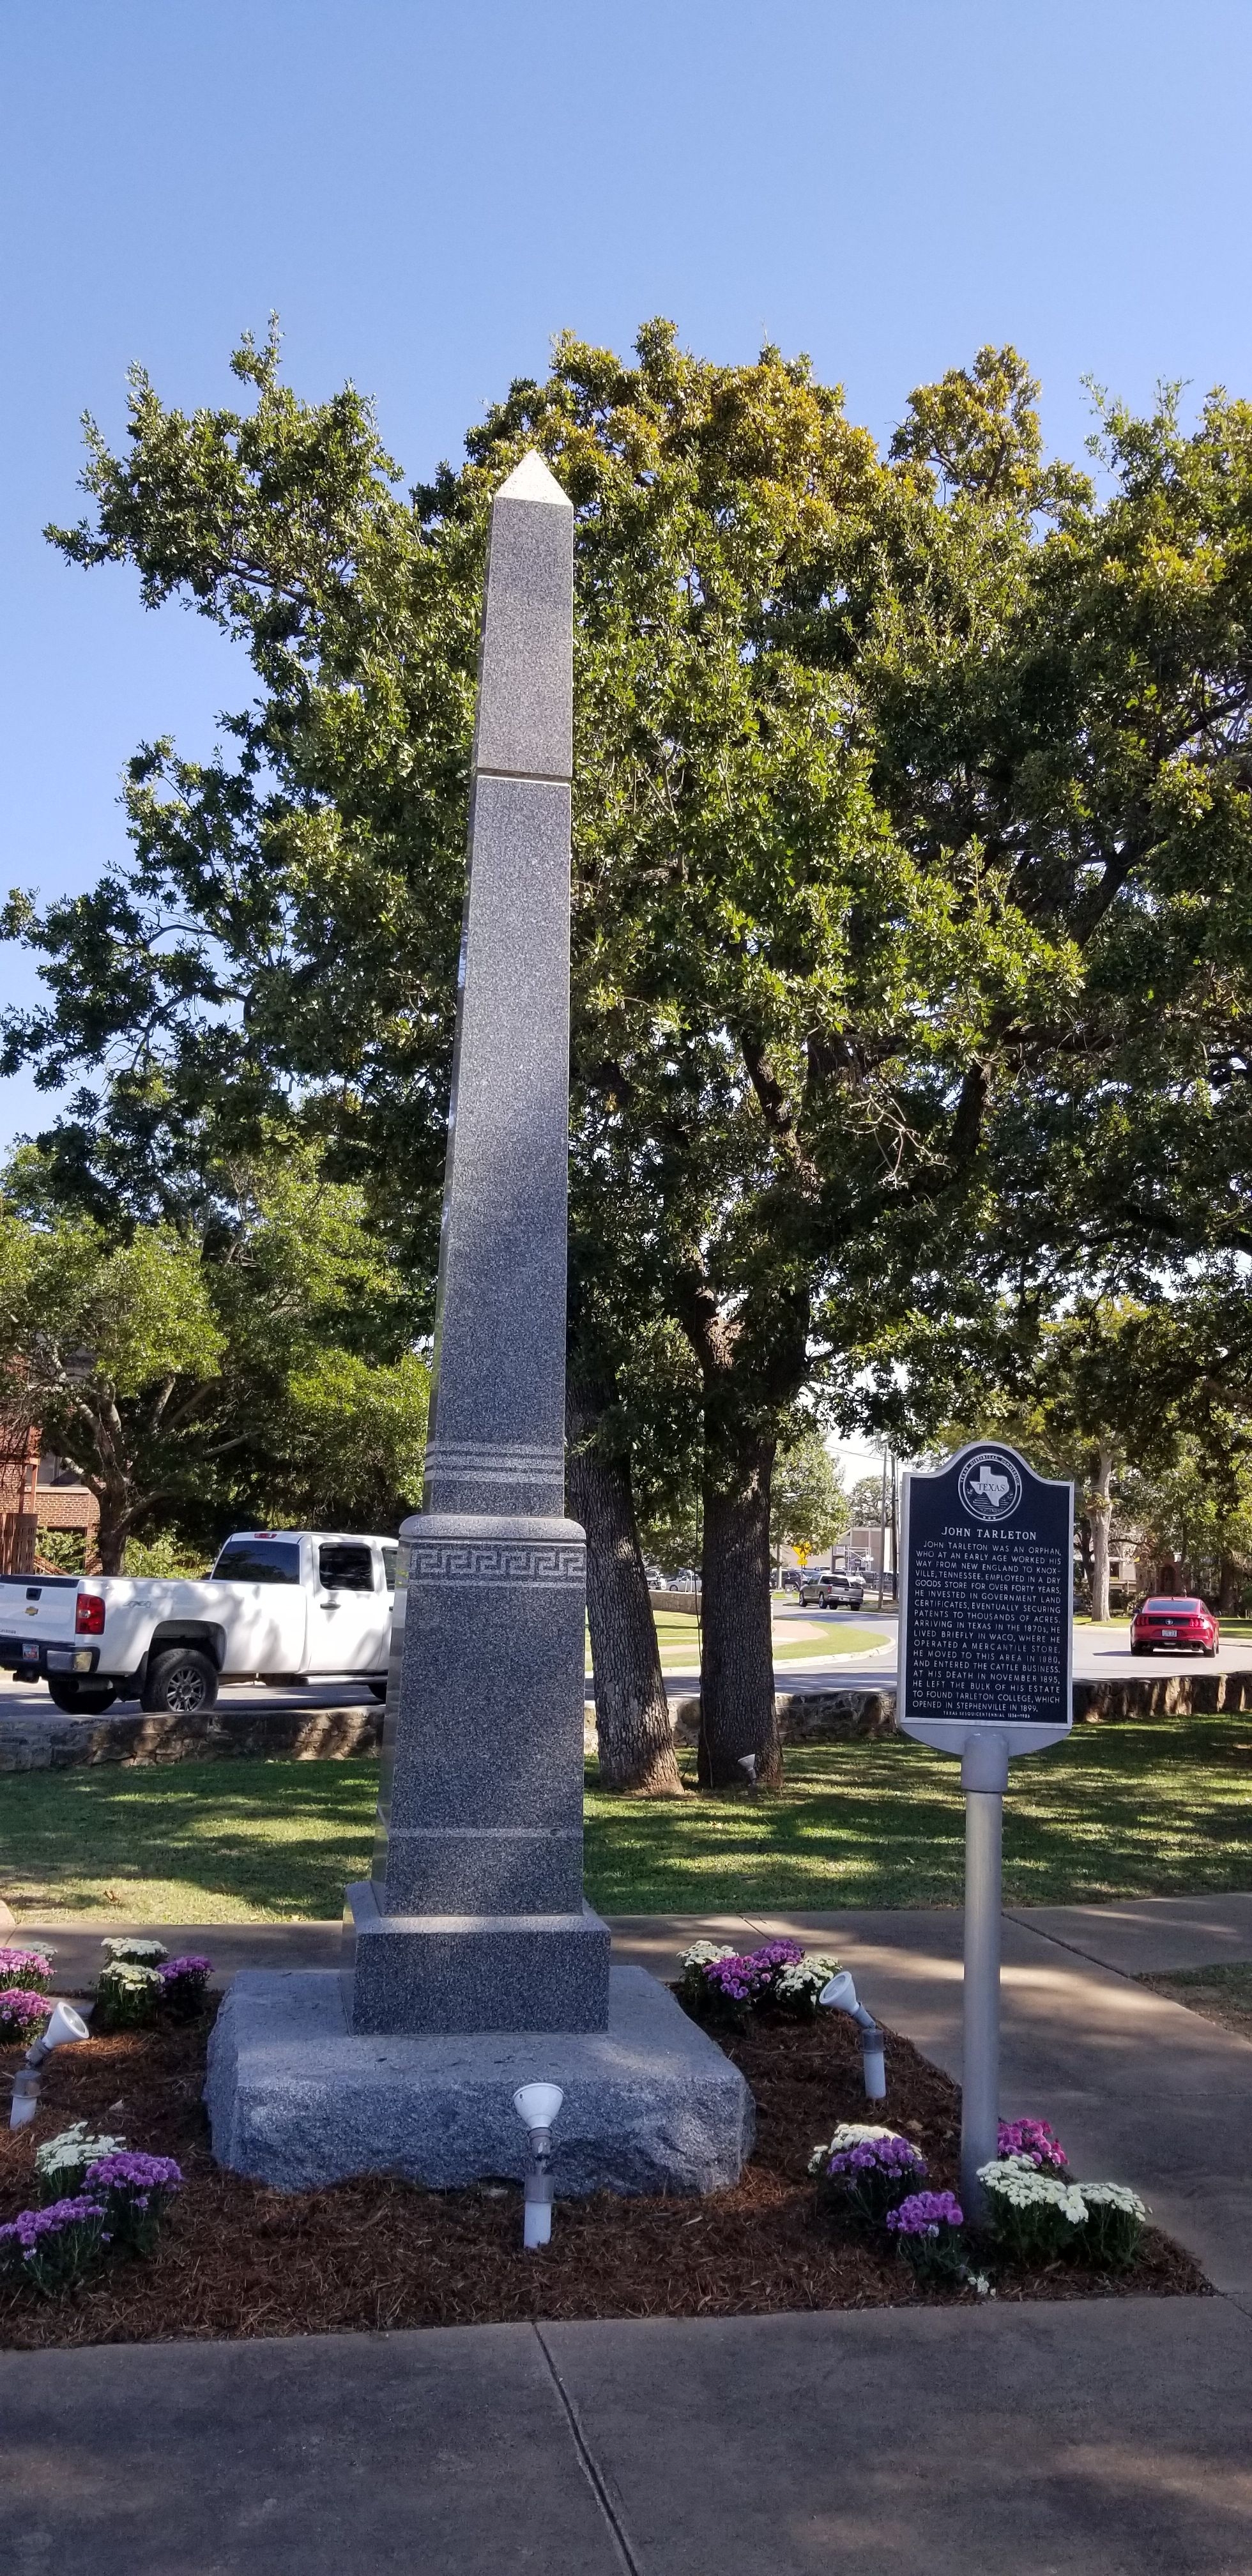 The John Tarleton Marker in a small park across from the cemetery